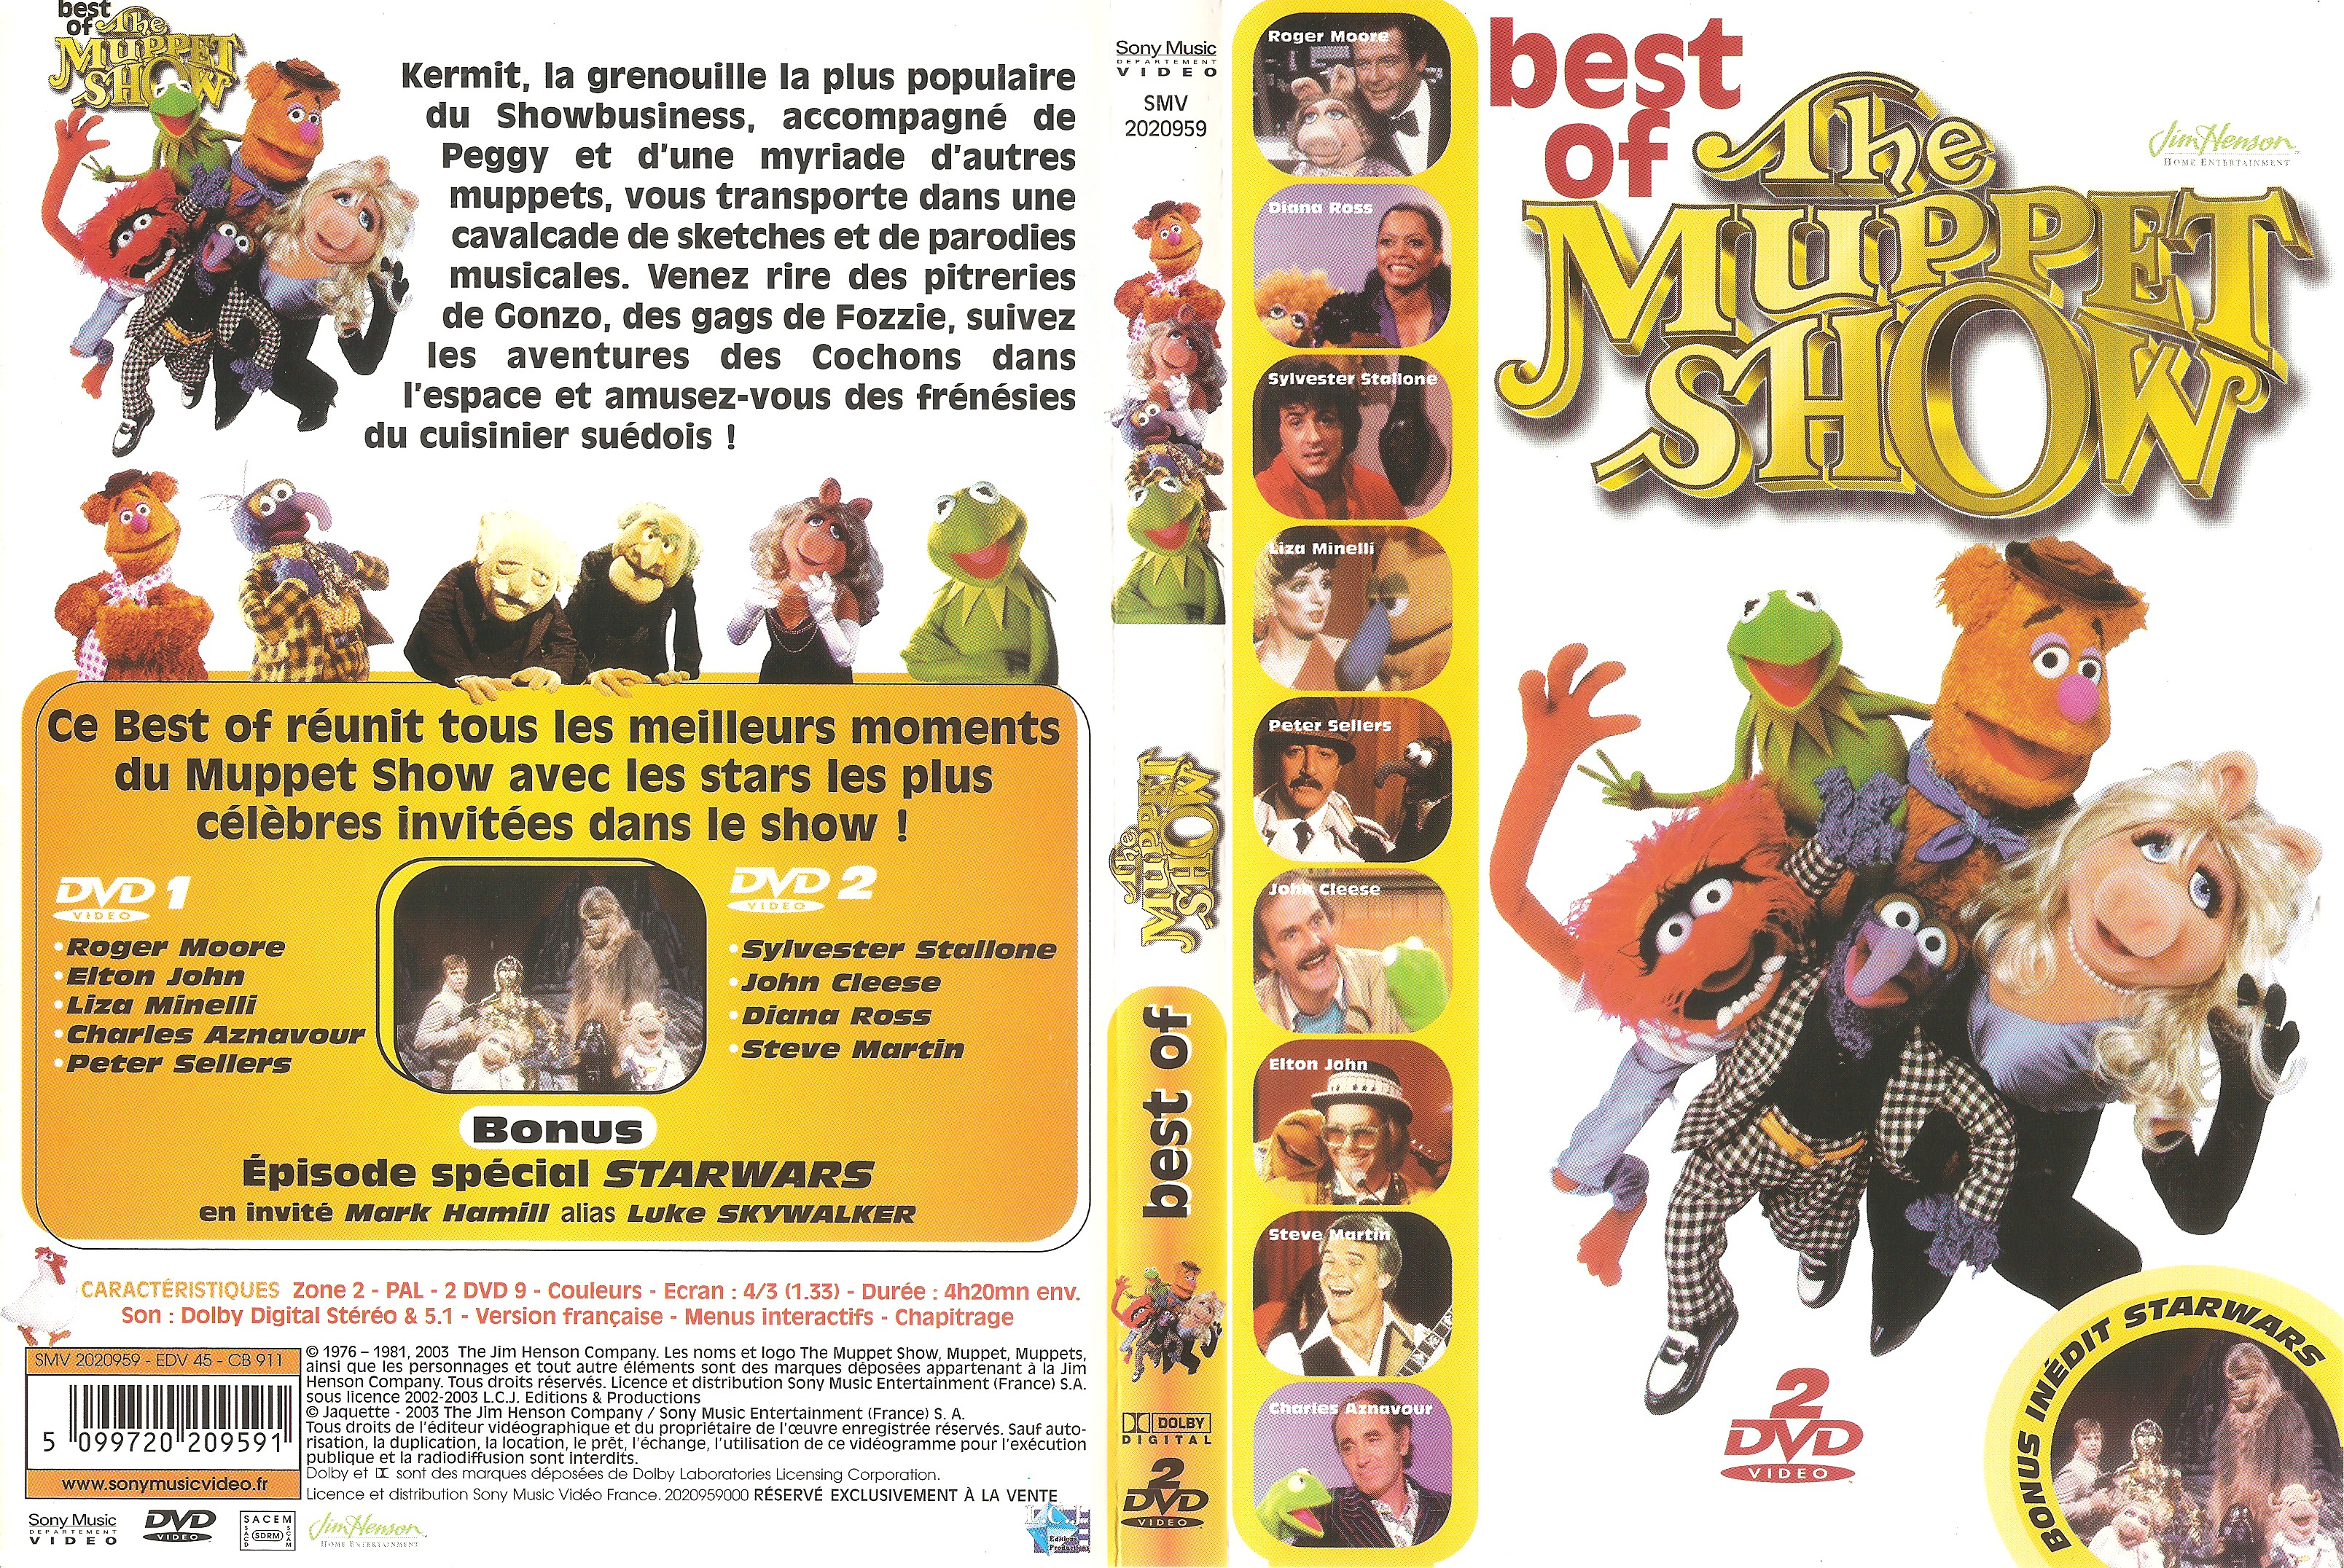 Jaquette DVD The Muppet Show Best of